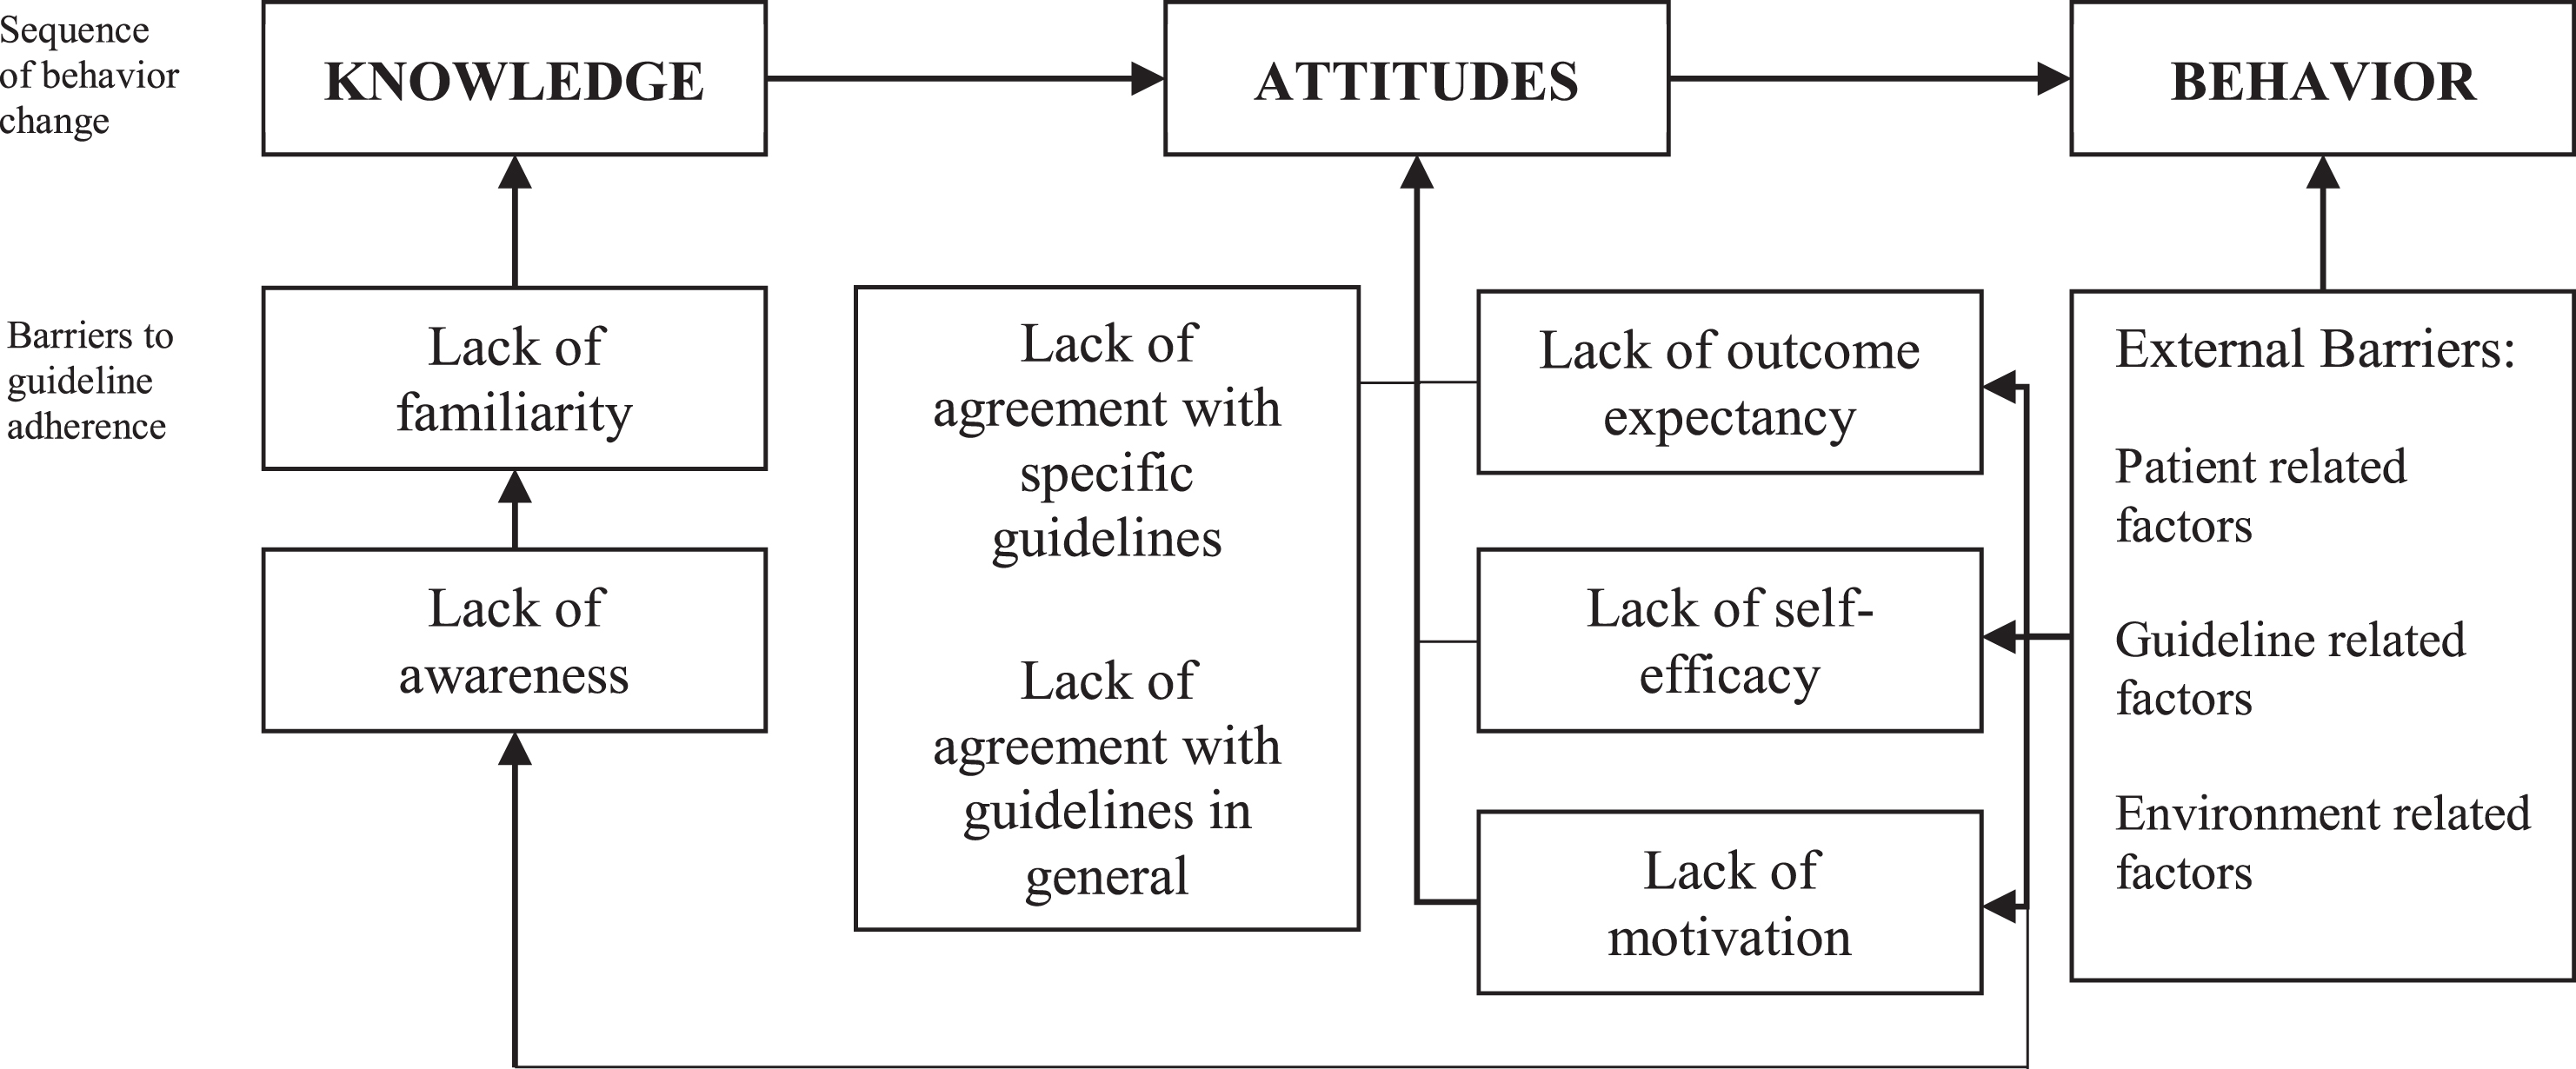 Cabana framework. Theoretical framework of Cabana is based on the principle of the knowledge-attitude-behavior framework, where knowledge shapes attitude and a change in attitude can influence behavior.